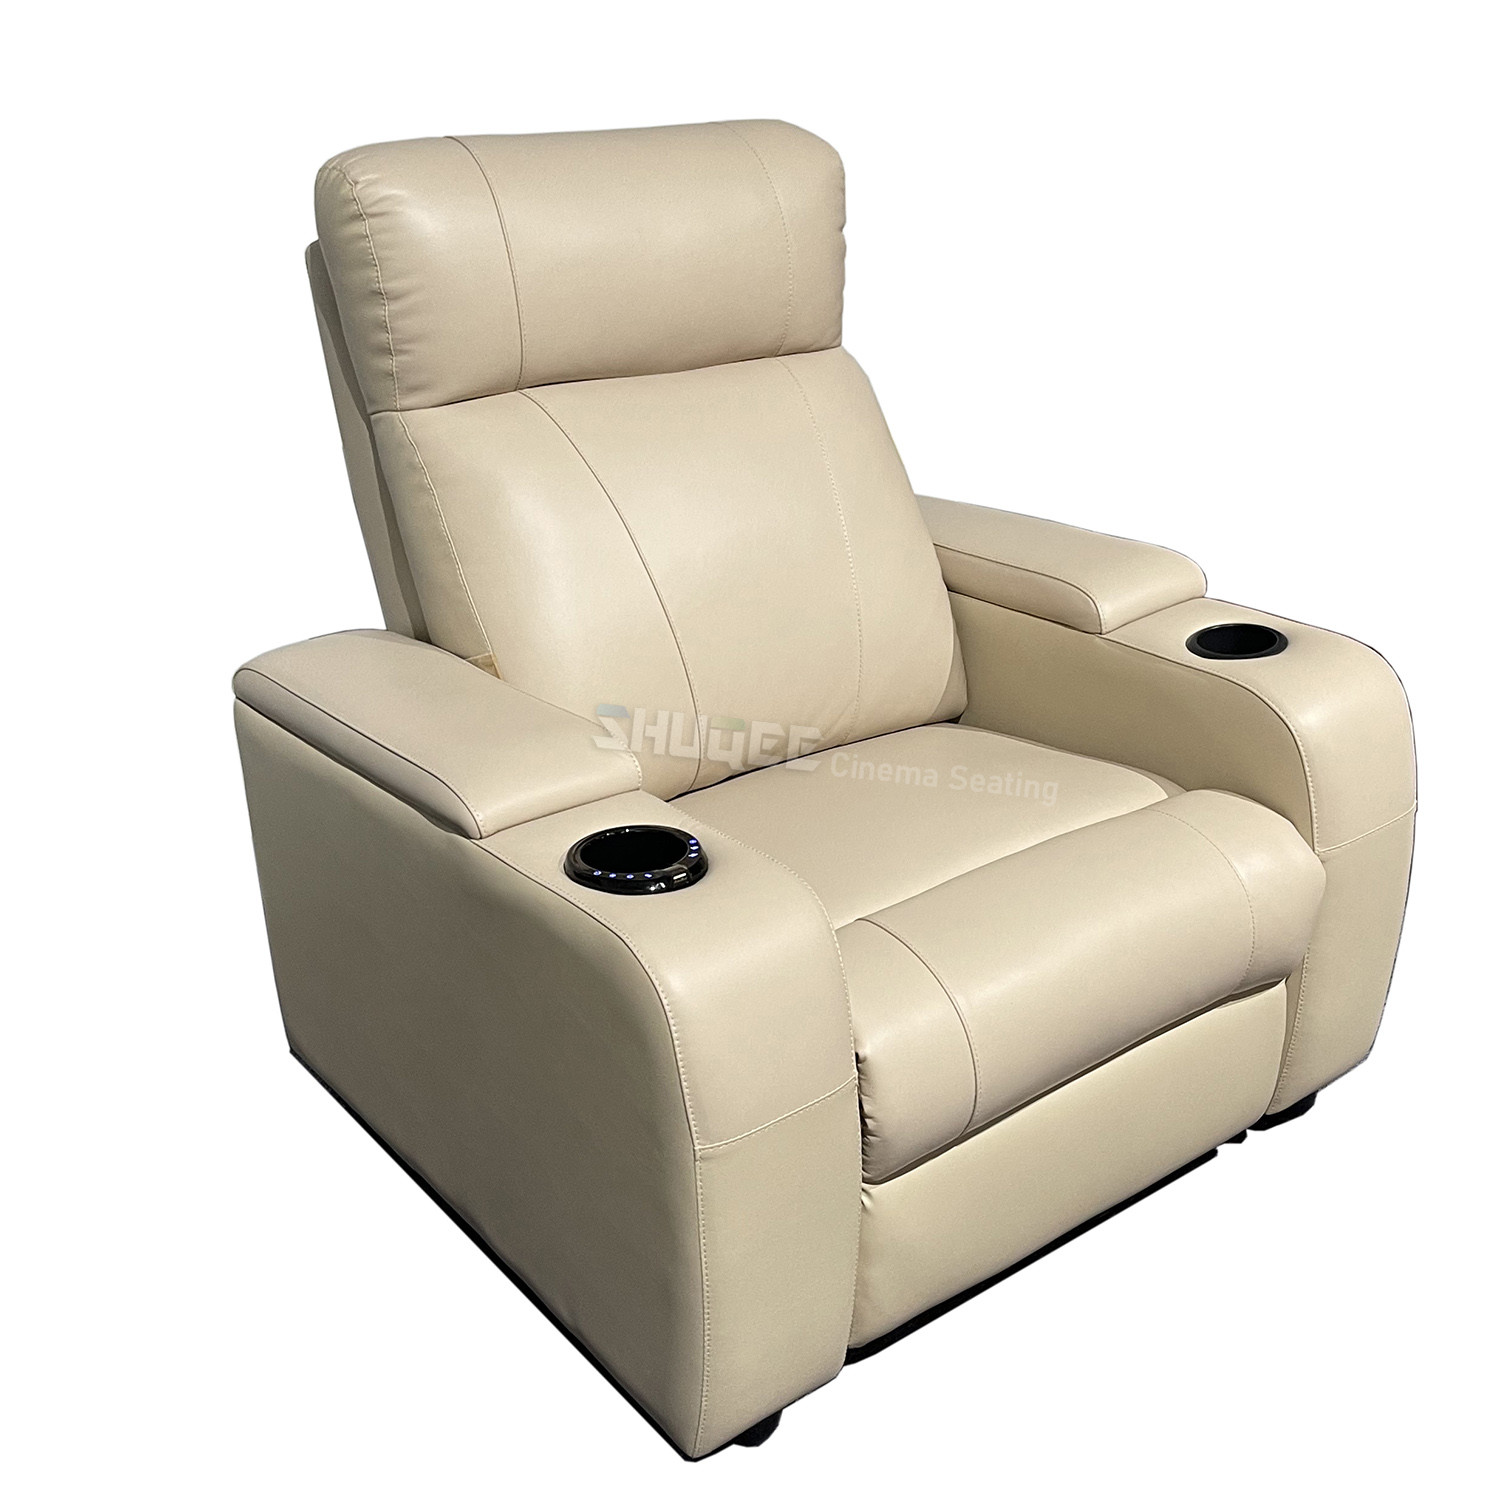  All Home Theater Equipment Supply VIP Leather Cinema Sofa With Cup Holder Available Colors Manufactures